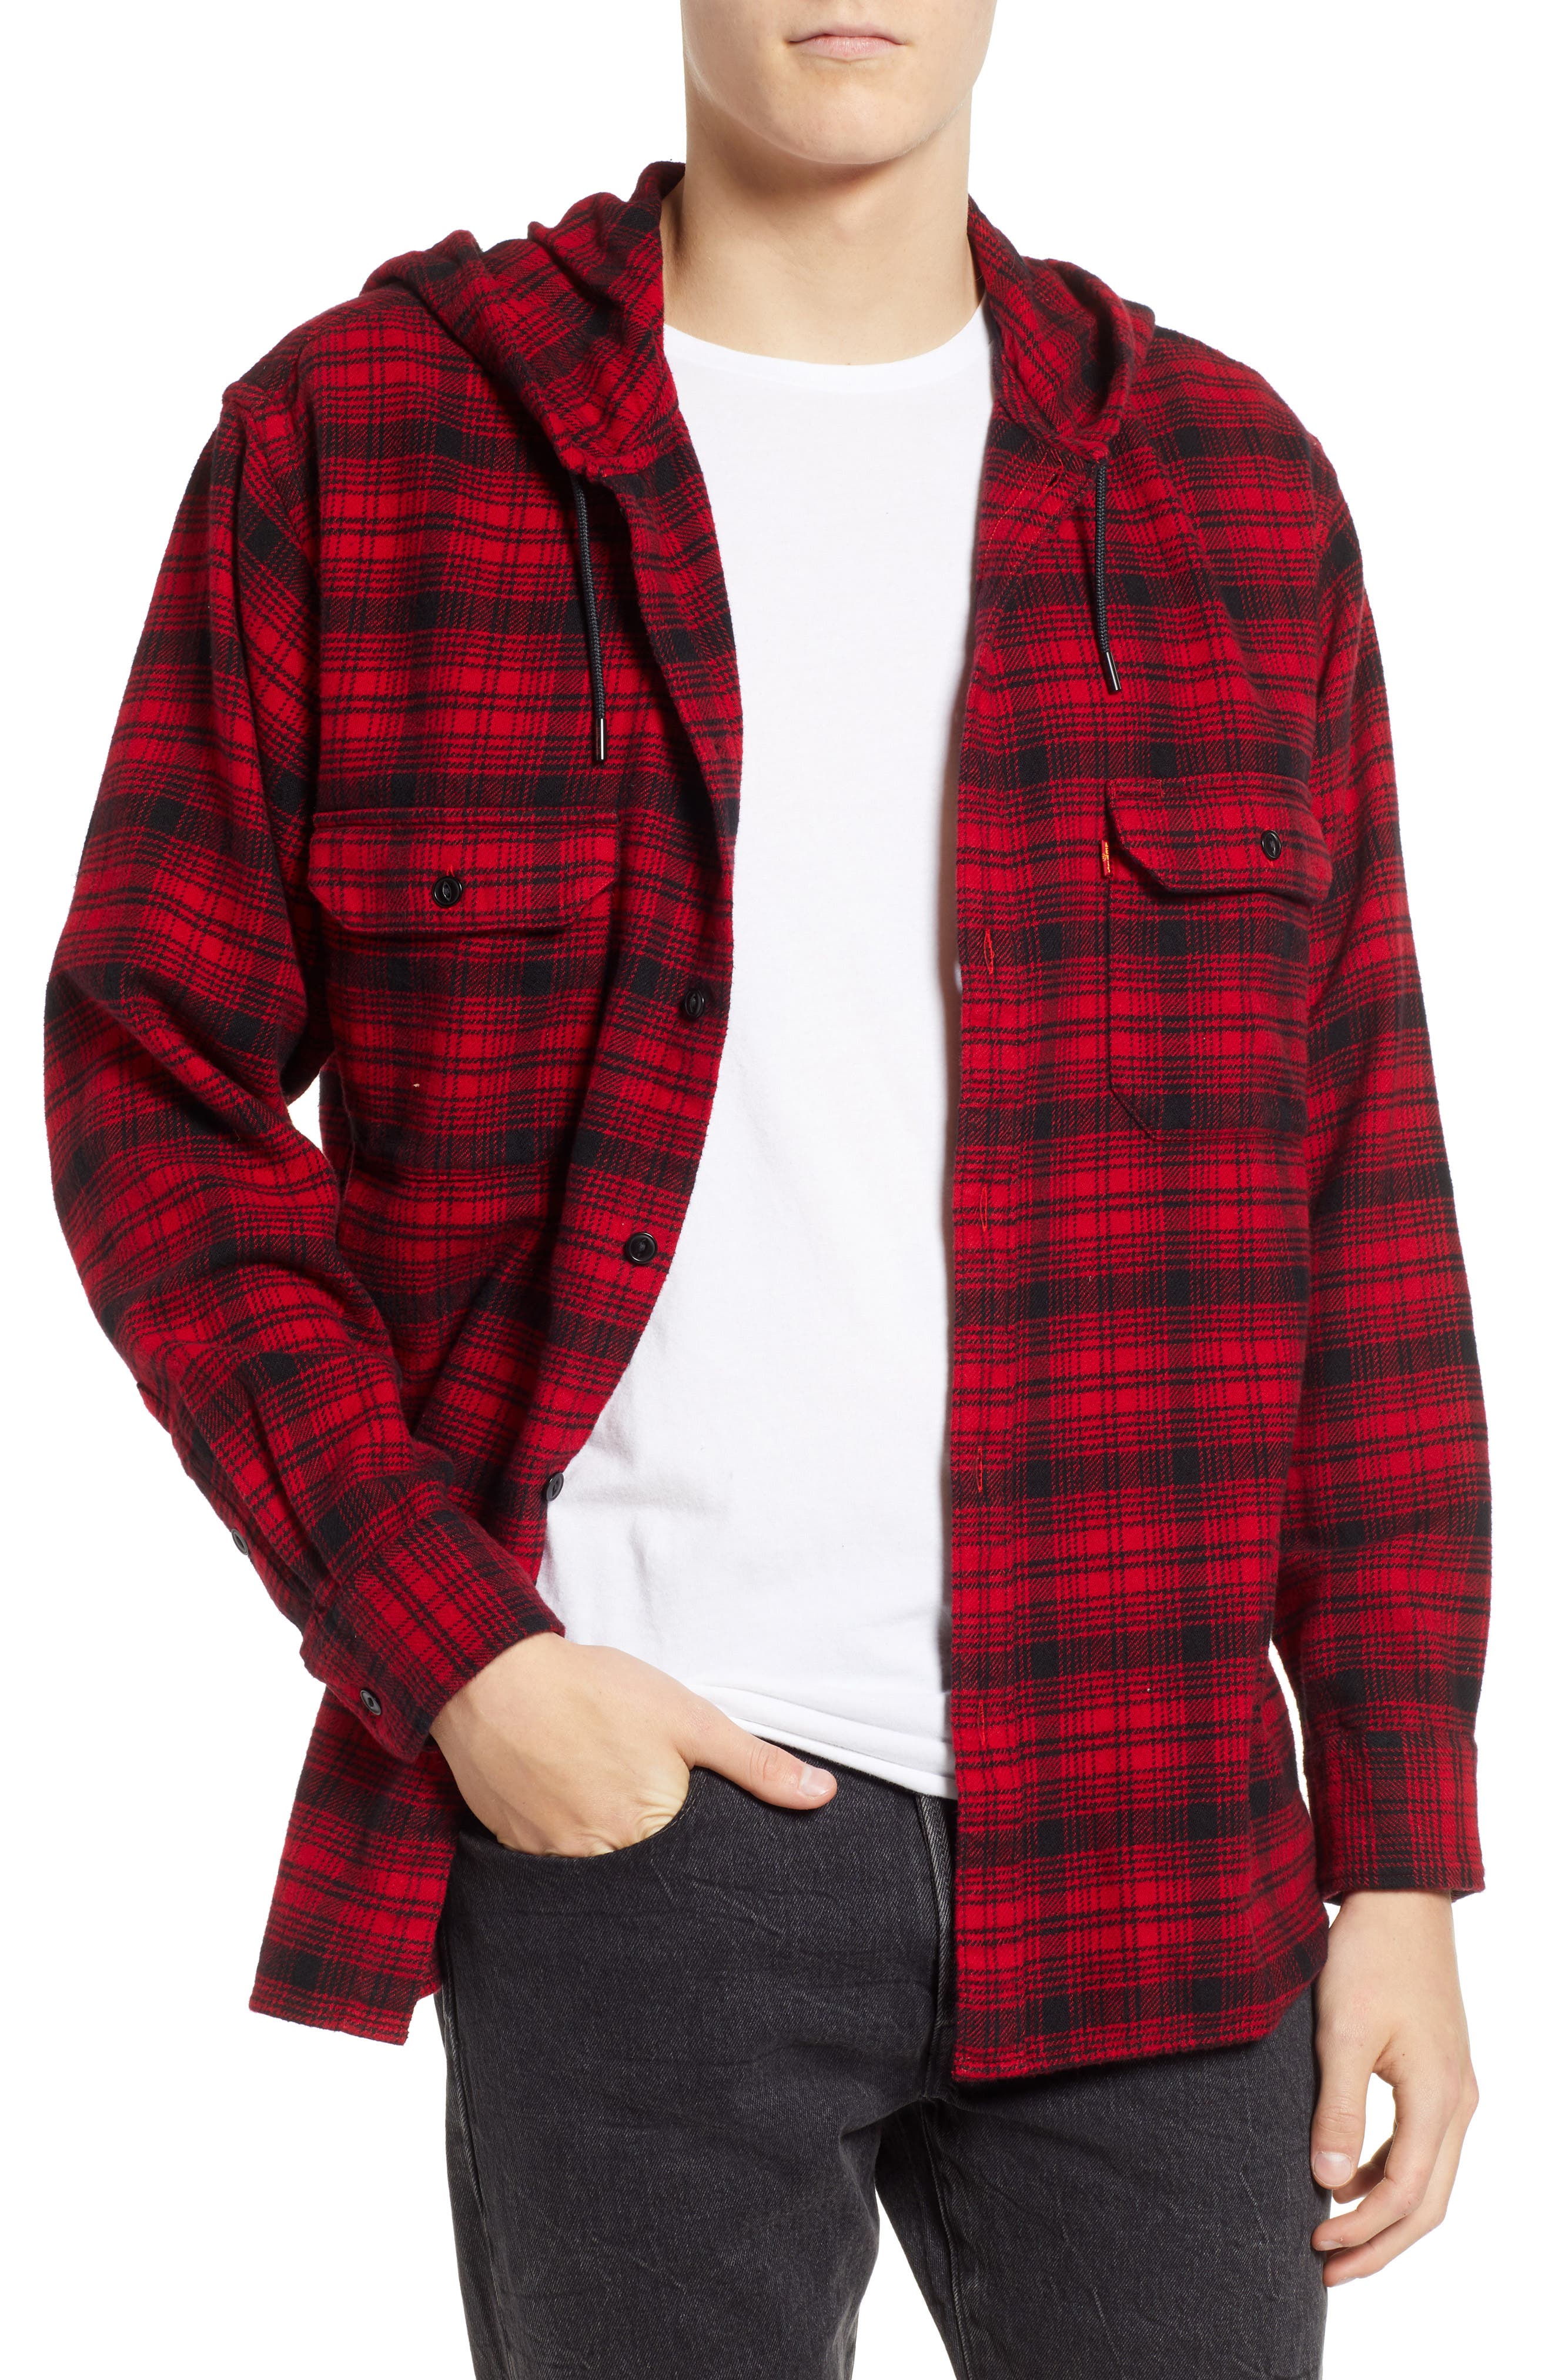 x Justin Timberlake Hooded Flannel 